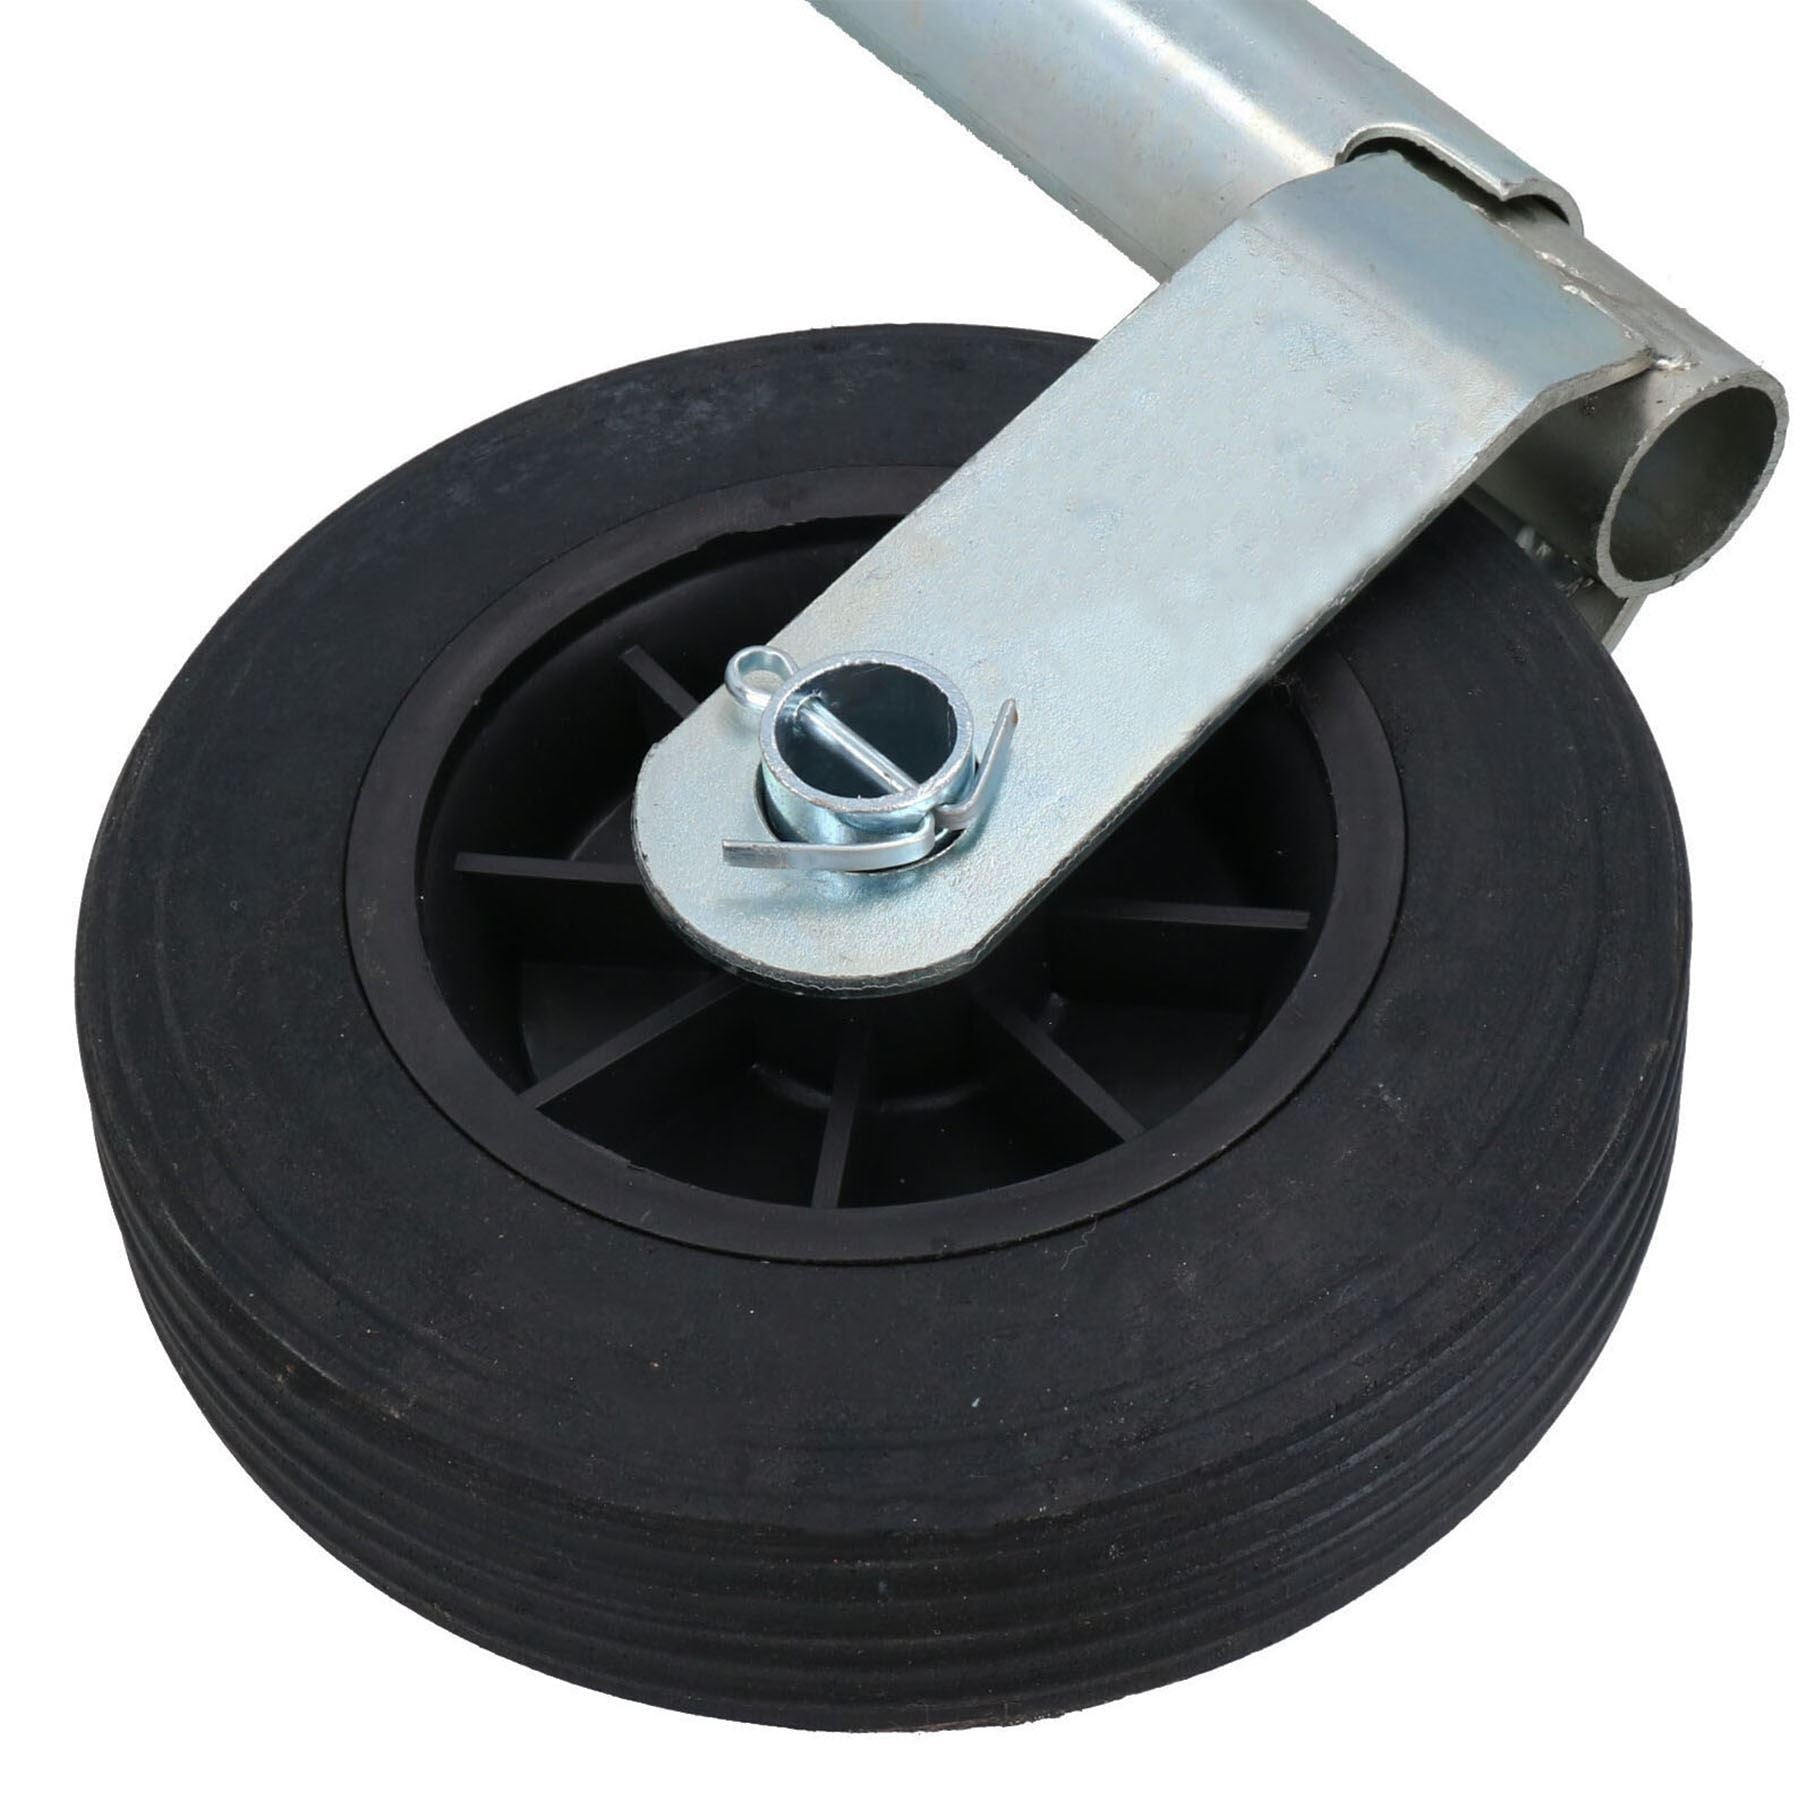 34mm Jockey Wheel with Clamp for Camping or Goods Trailer TR004